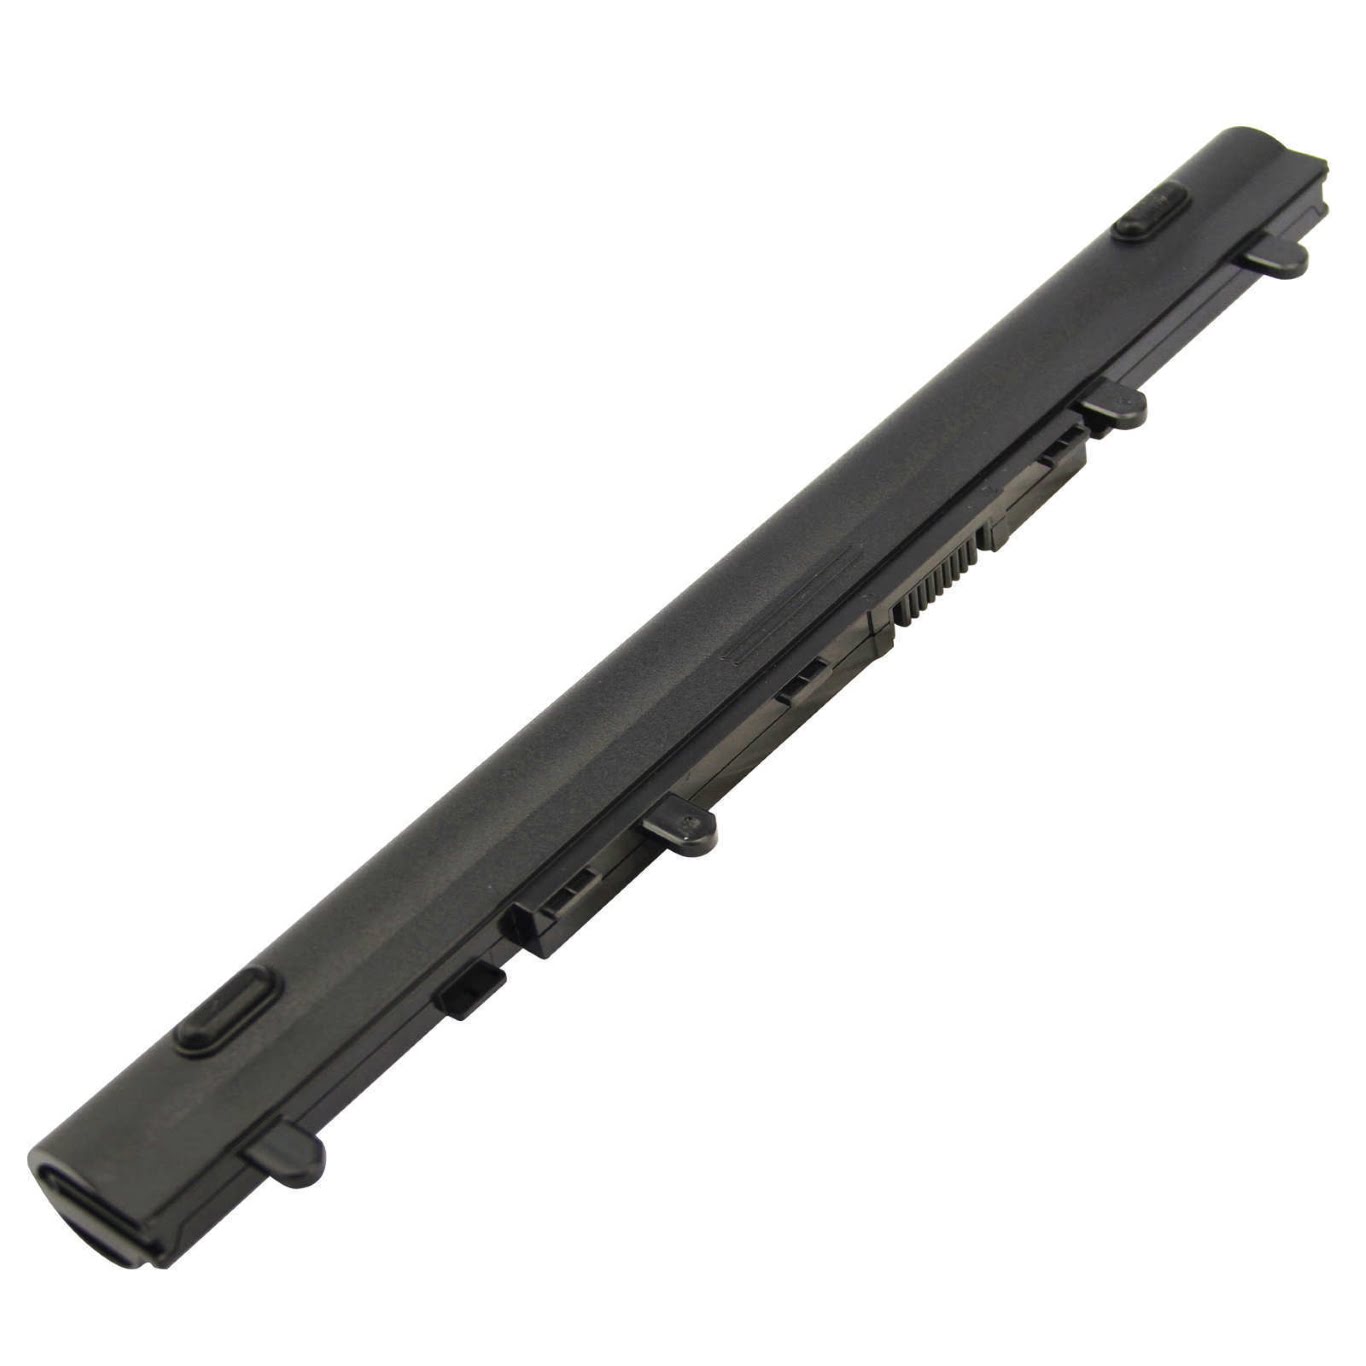 4ICR17/65, AL12A32 replacement Laptop Battery for Acer Aspire S3-471, Aspire V5, 14.8 V, 4 cells, 2200 Mah